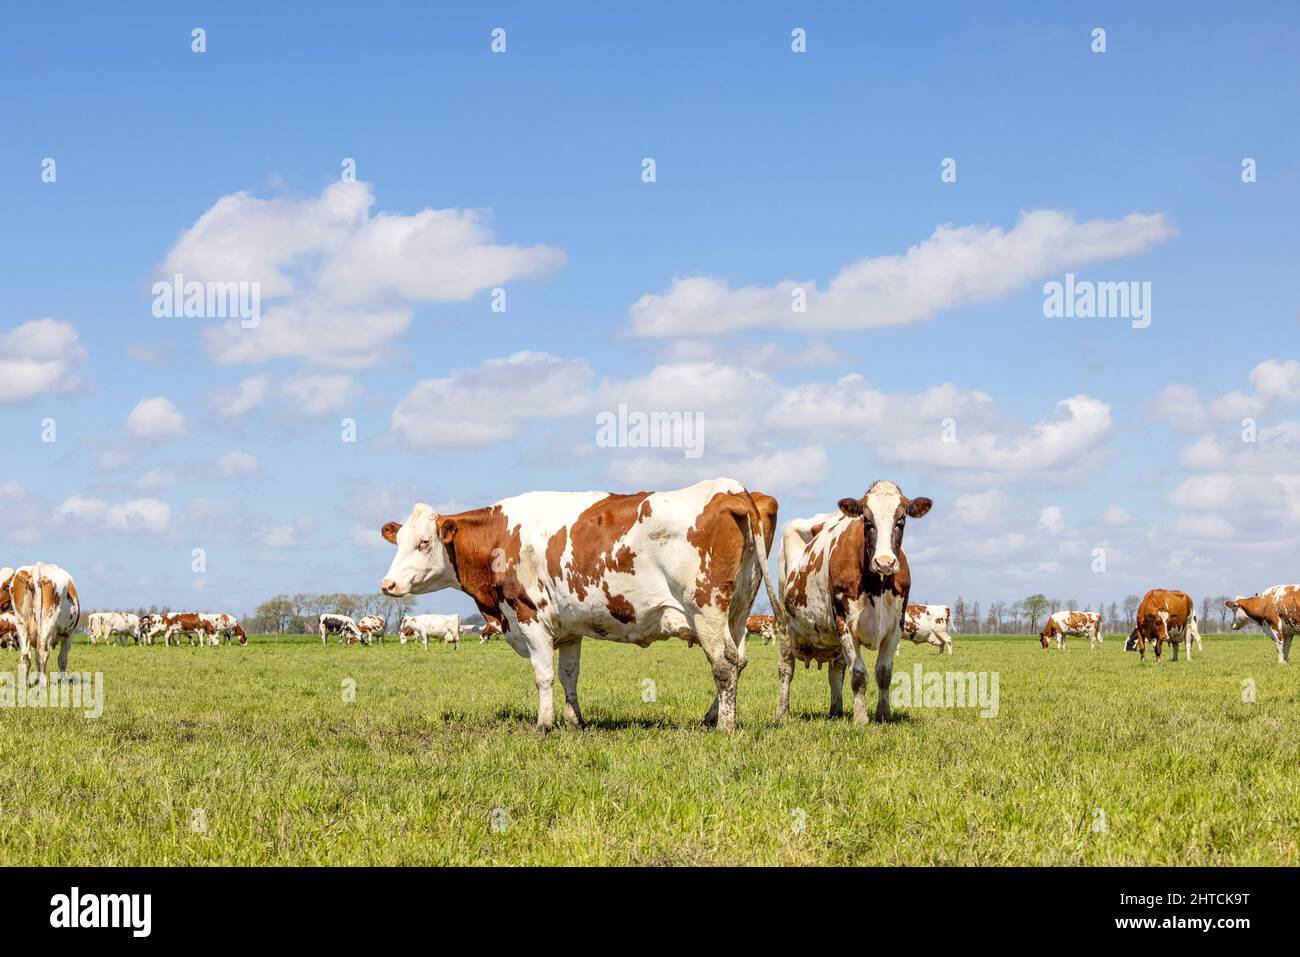 Two cows friendly standing together, the herd grazing in a pasture, red and white, a blue sky and horizon over land Stock Photo